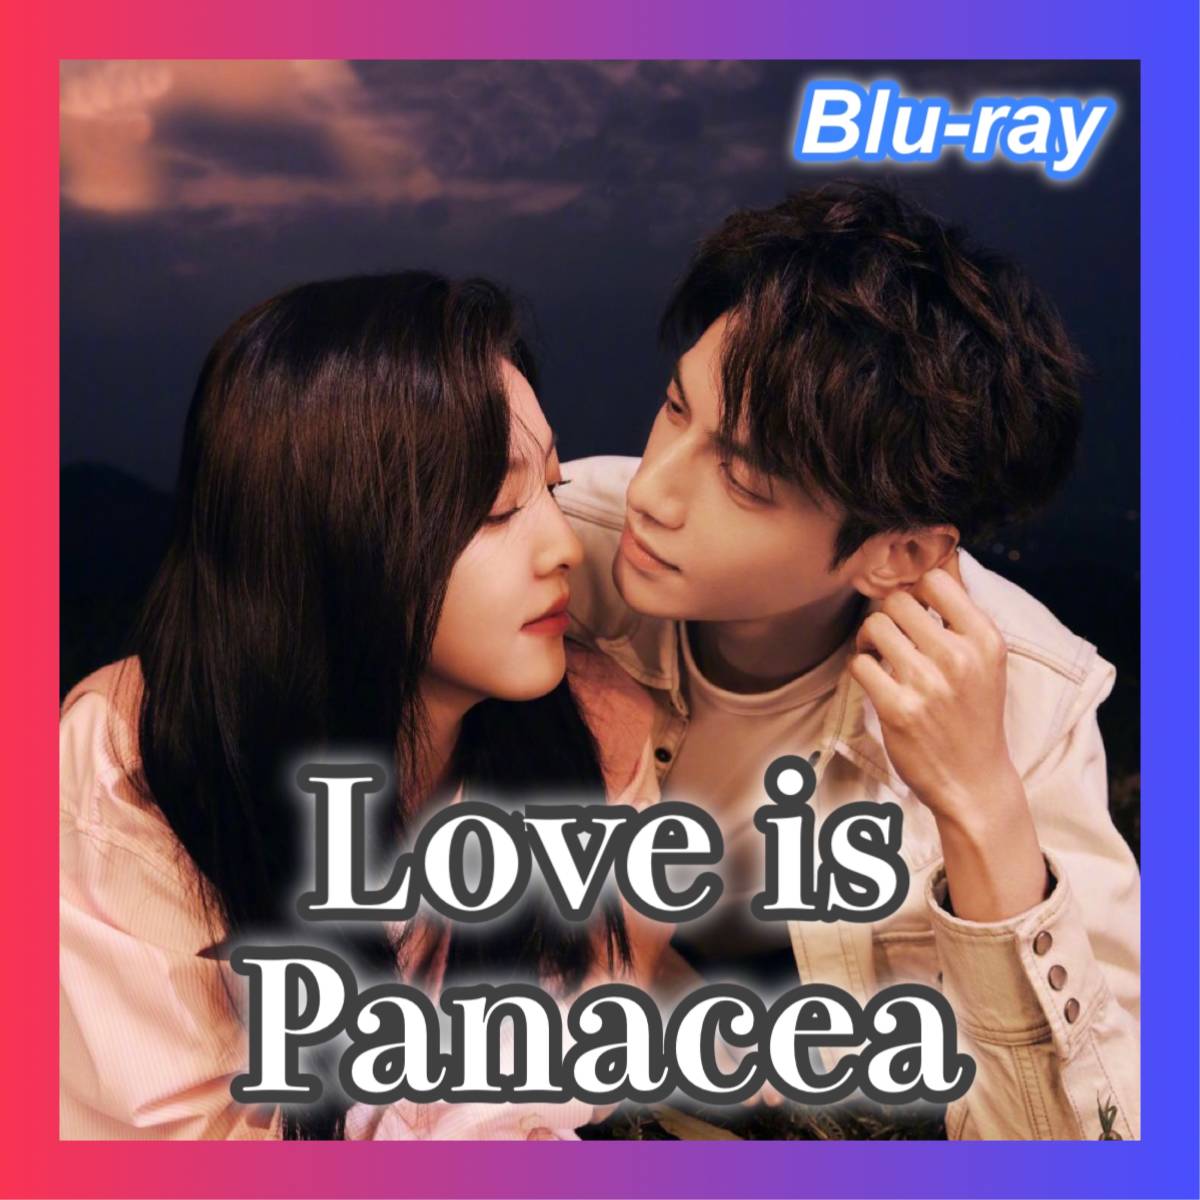 Love is Panacea（自動翻訳）』^move^: ^『中国ドラマ』^ and ^「Blu-ray」^. ^Secure^ for■/_画像1